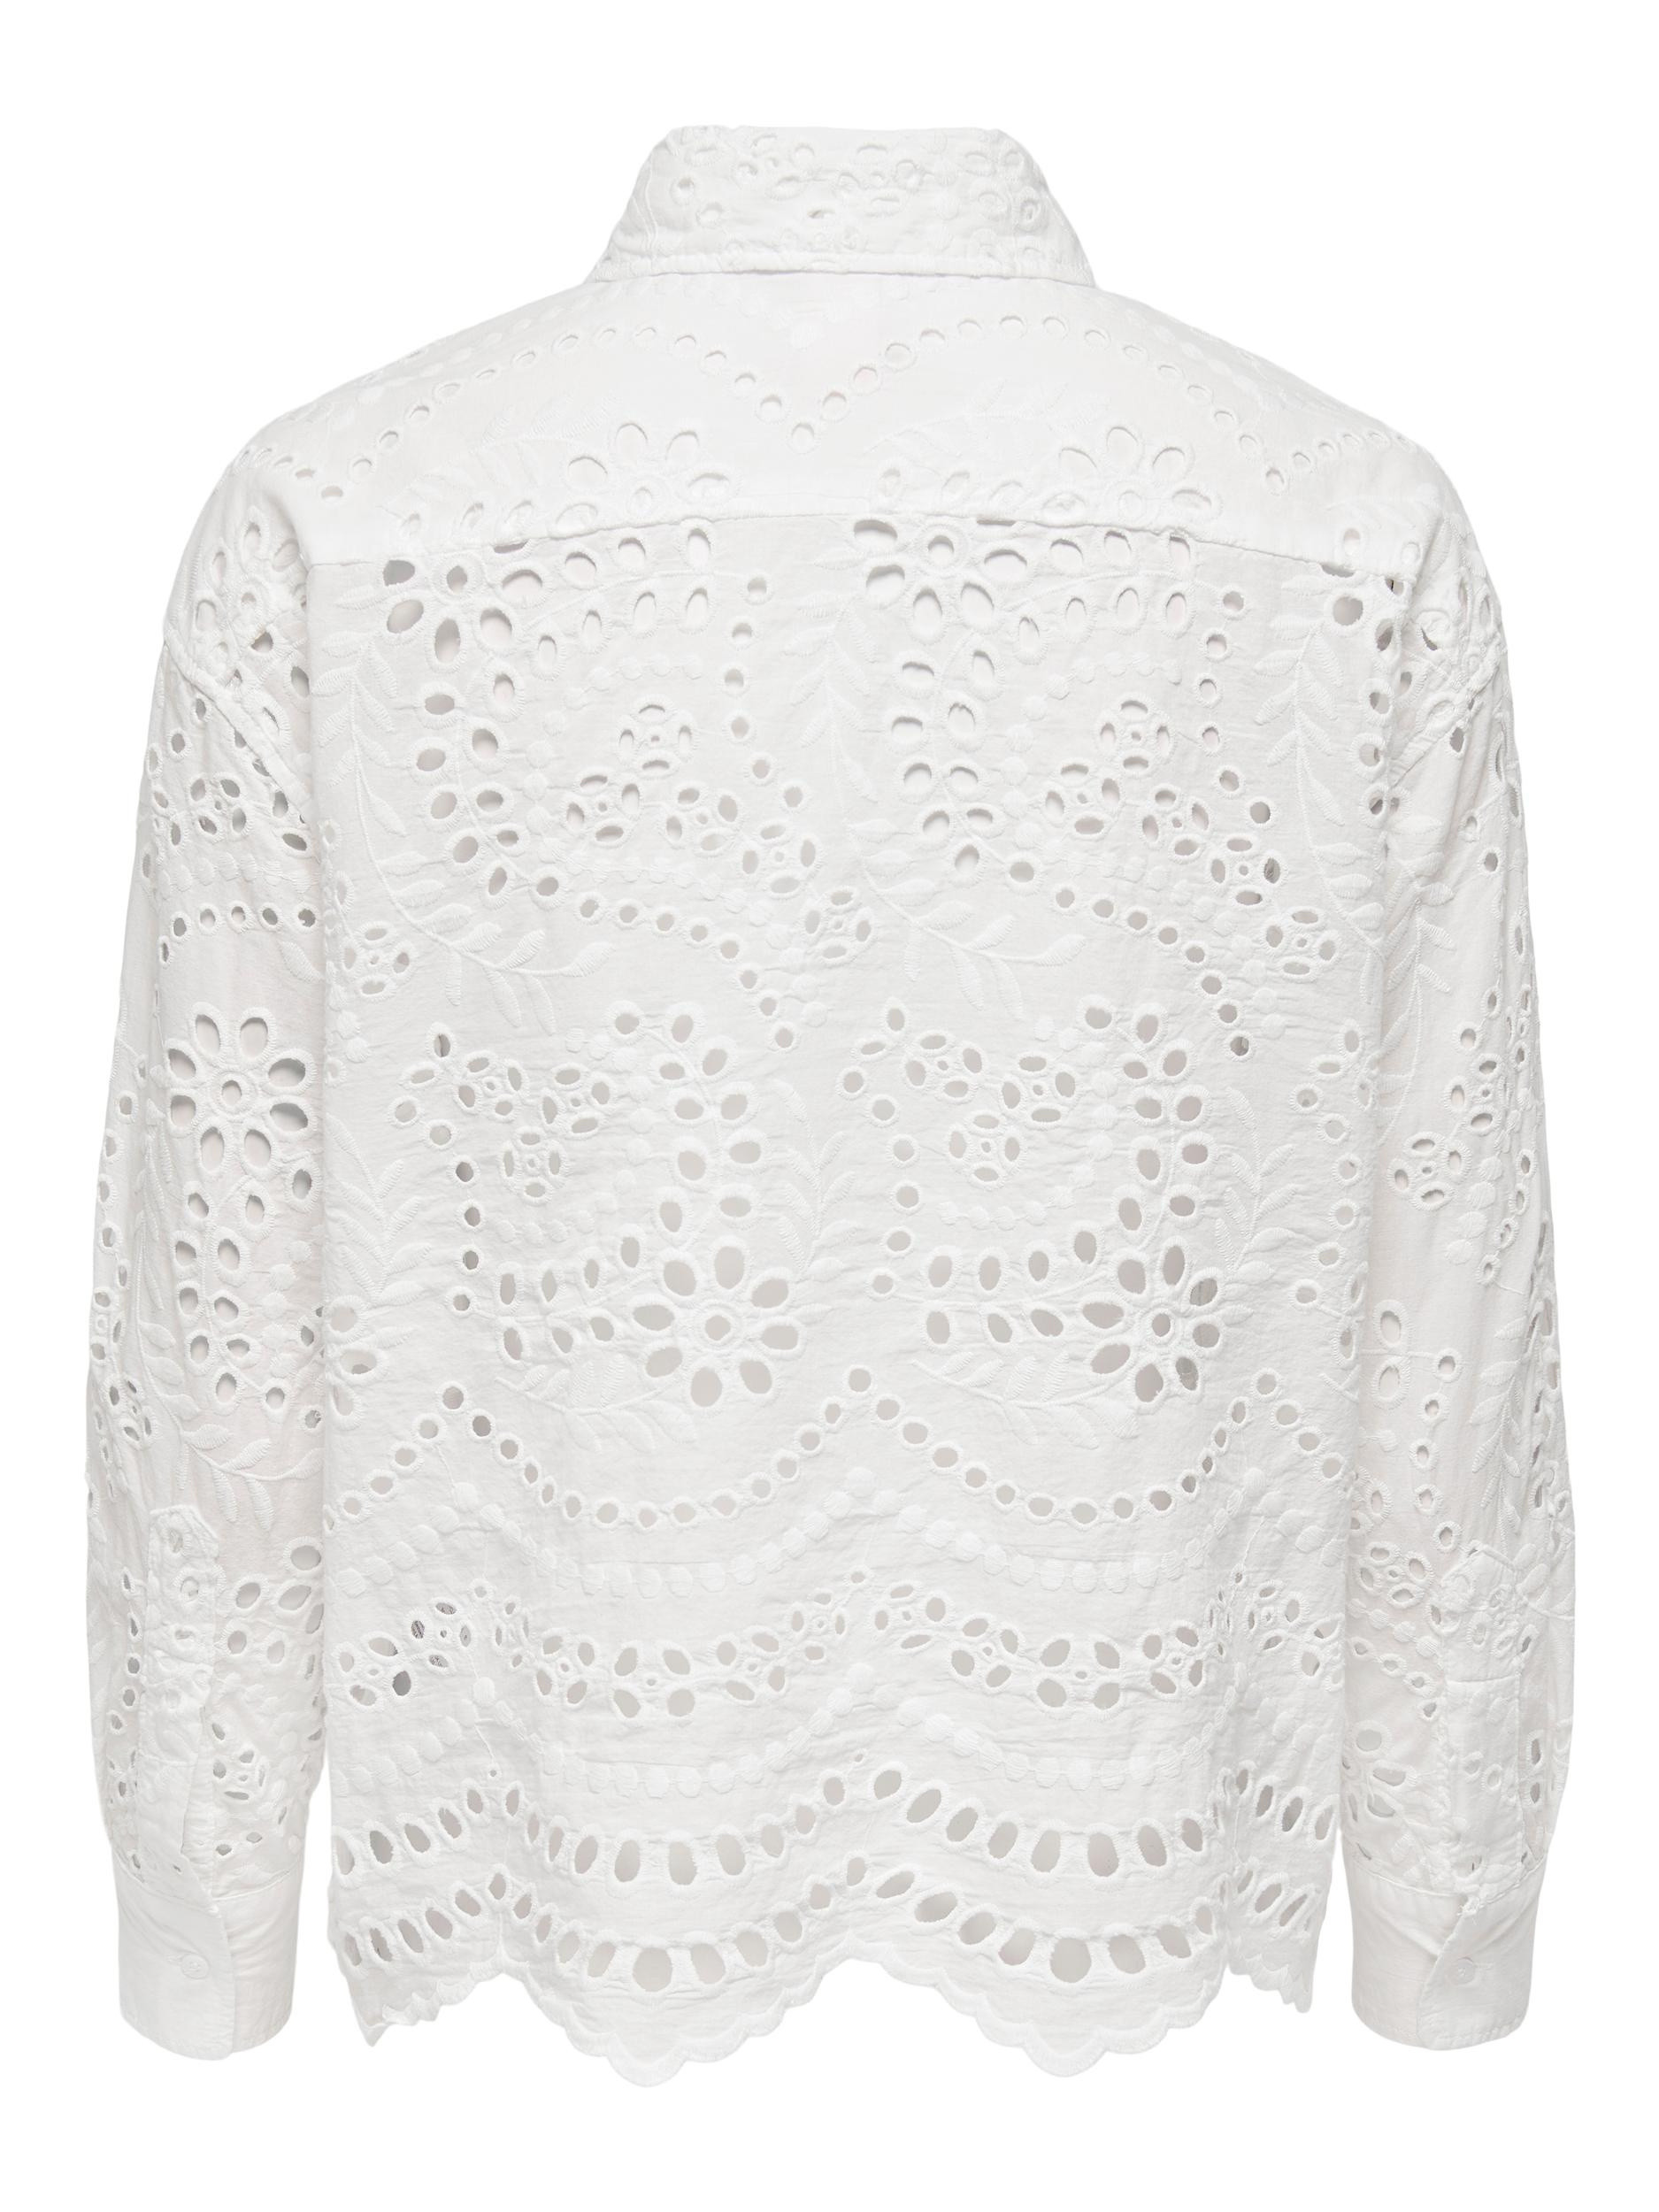 Only - Camicia boxy fit in pizzo, Bianco, large image number 1